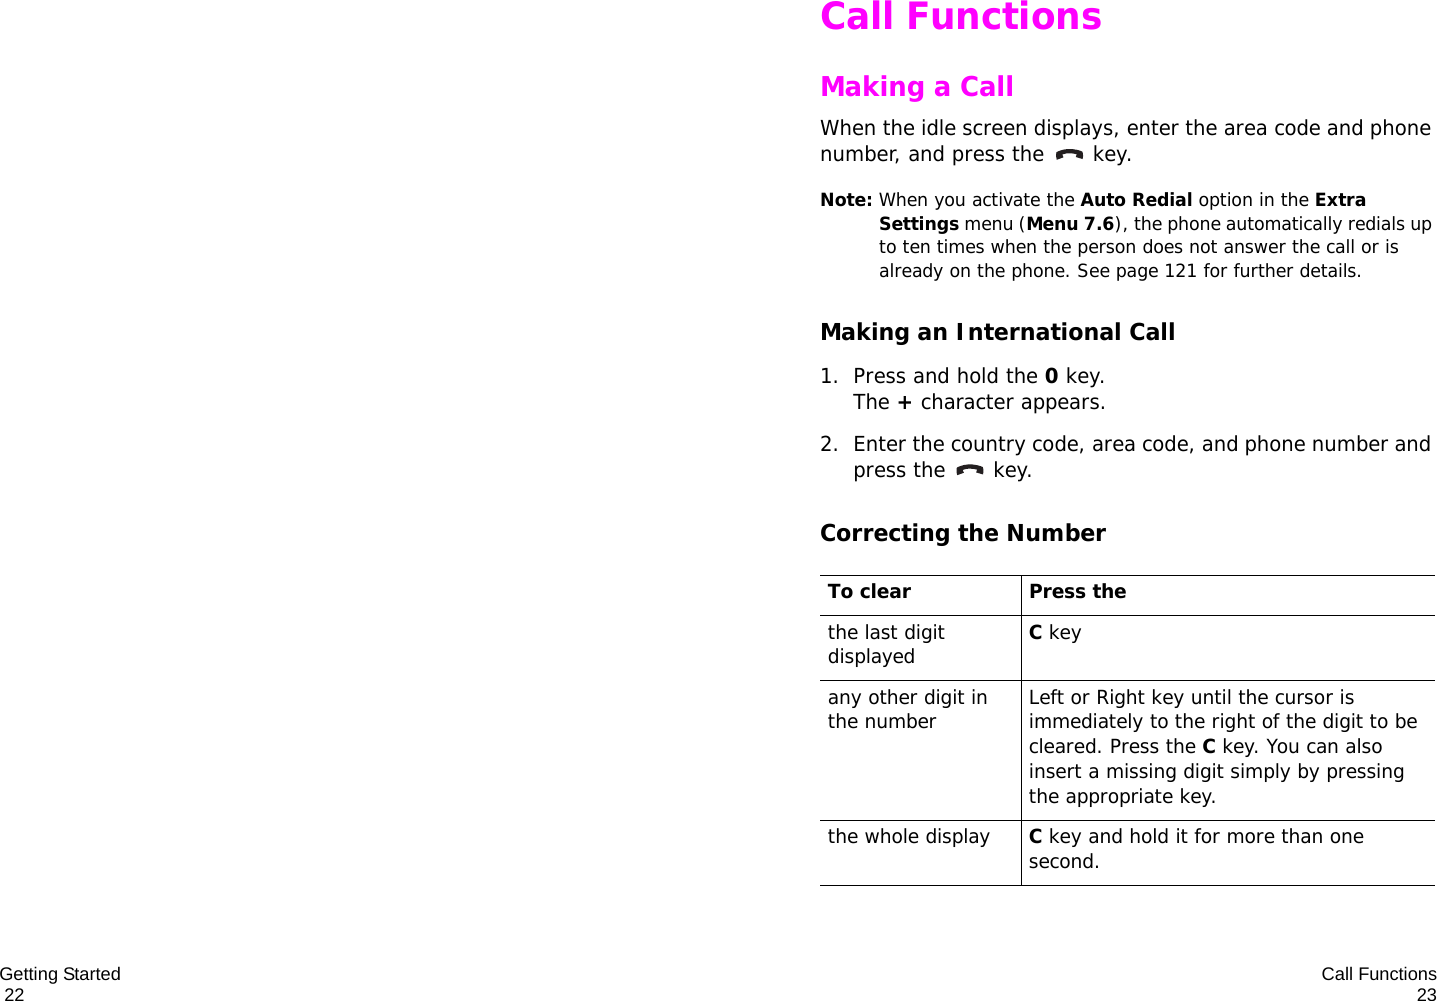 Getting Started                                                                                       22 Call Functions23Call FunctionsMaking a CallWhen the idle screen displays, enter the area code and phone number, and press the   key.Note: When you activate the Auto Redial option in the Extra Settings menu (Menu 7.6), the phone automatically redials up to ten times when the person does not answer the call or is already on the phone. See page 121 for further details.Making an International Call1. Press and hold the 0 key. The + character appears.2. Enter the country code, area code, and phone number and press the   key.Correcting the NumberTo clear Press thethe last digit displayedC keyany other digit in the number Left or Right key until the cursor is immediately to the right of the digit to be cleared. Press the C key. You can also insert a missing digit simply by pressing the appropriate key.the whole displayC key and hold it for more than one second.